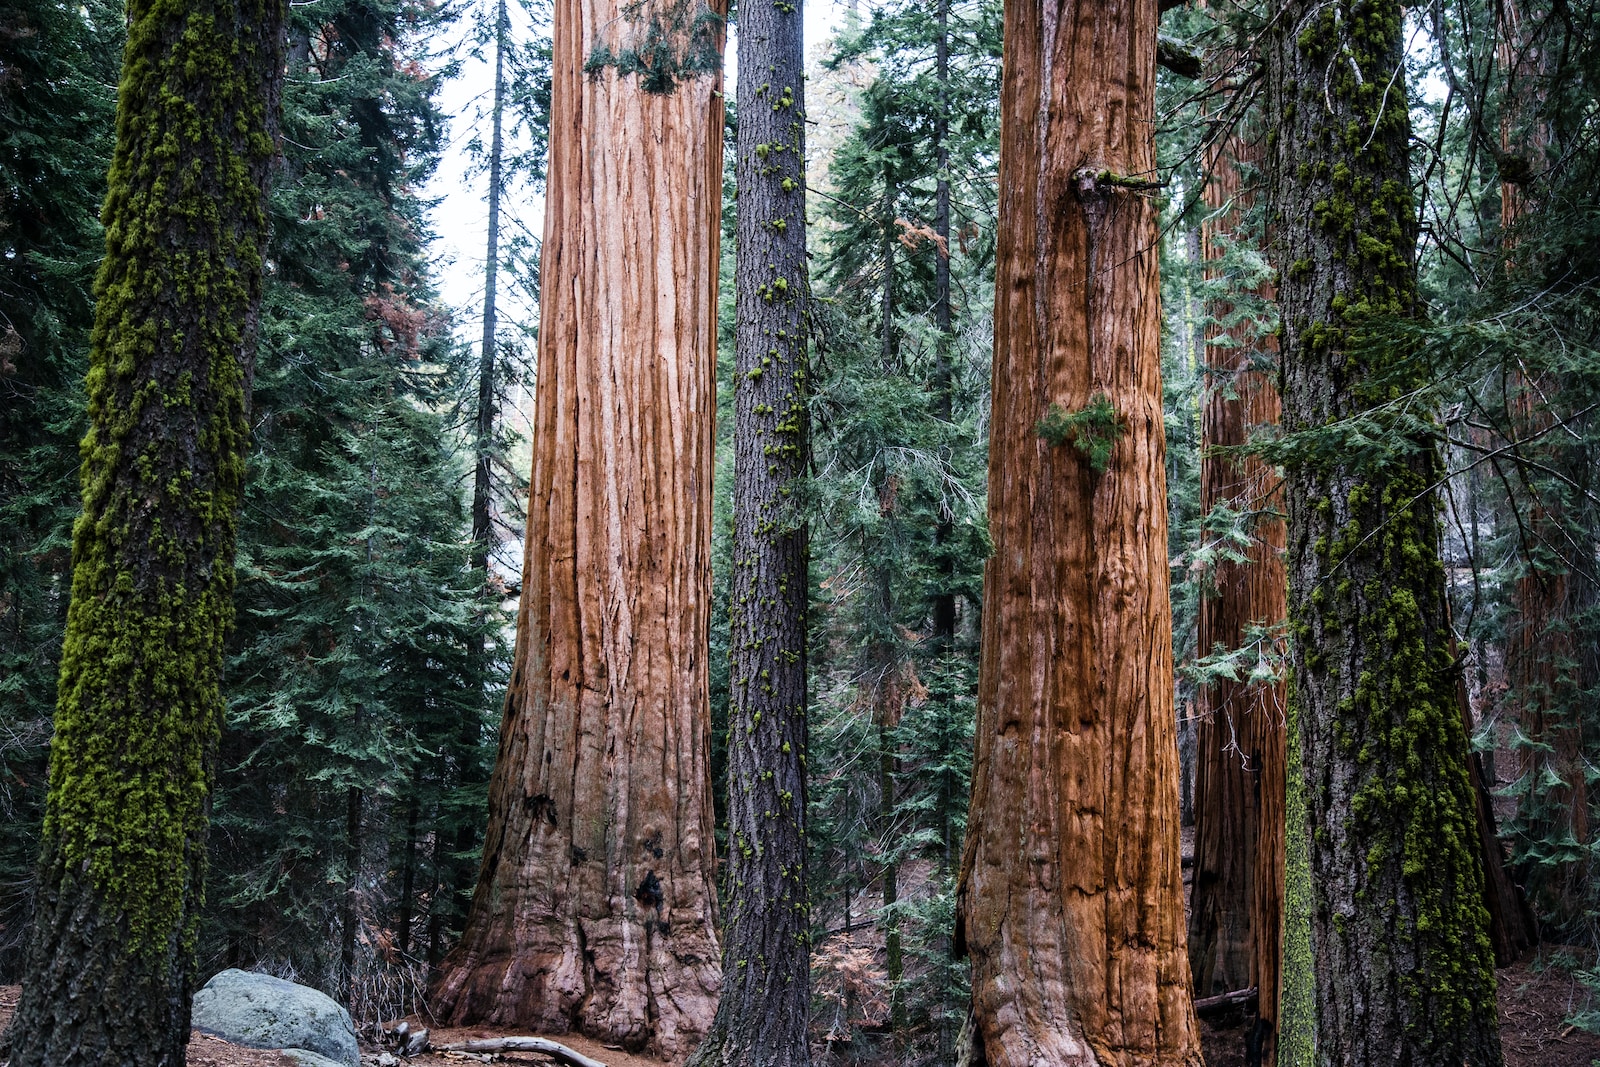 tree trunks during daytime from Sequoia & Kings Canyon National Park on Slow Down, See More from Sequoia & Kings Canyon National Park on Slow Down, See More from Sequoia & Kings Canyon National Park: Stay Tuned on Slow Down, See More from Sequoia & Kings Canyon National Park: Stay Tuned on Slow Down, See More from Sequoia & Kings Canyon National Park: Stay Tuned on Slow Down, See More from Sequoia & Kings Canyon National Park: Stay Tuned on Slow Down, See More from Sequoia & Kings Canyon National Park: Stay Tuned on Slow Down, See More from Sequoia & Kings Canyon National Park: Stay Tuned on Slow Down, See More from Sequoia & Kings Canyon National Park: Stay Tuned on Slow Down, See More from Sequoia & Kings Canyon National Park: Stay Tuned on Slow Down, See More from Sequoia & Kings Canyon National Park: Stay Tuned on Slow Down, See More from Sequoia & Kings Canyon National Park: Stay Tuned on Slow Down, See More from Sequoia & Kings Canyon National Park: Stay Tuned on Slow Down, See More from Sequoia & Kings Canyon National Park: Stay Tuned on Slow Down, See More from Sequoia & Kings Canyon National Park: Stay Tuned on Slow Down, See More from Sequoia & Kings Canyon National Park: Stay Tuned on Slow Down, See More